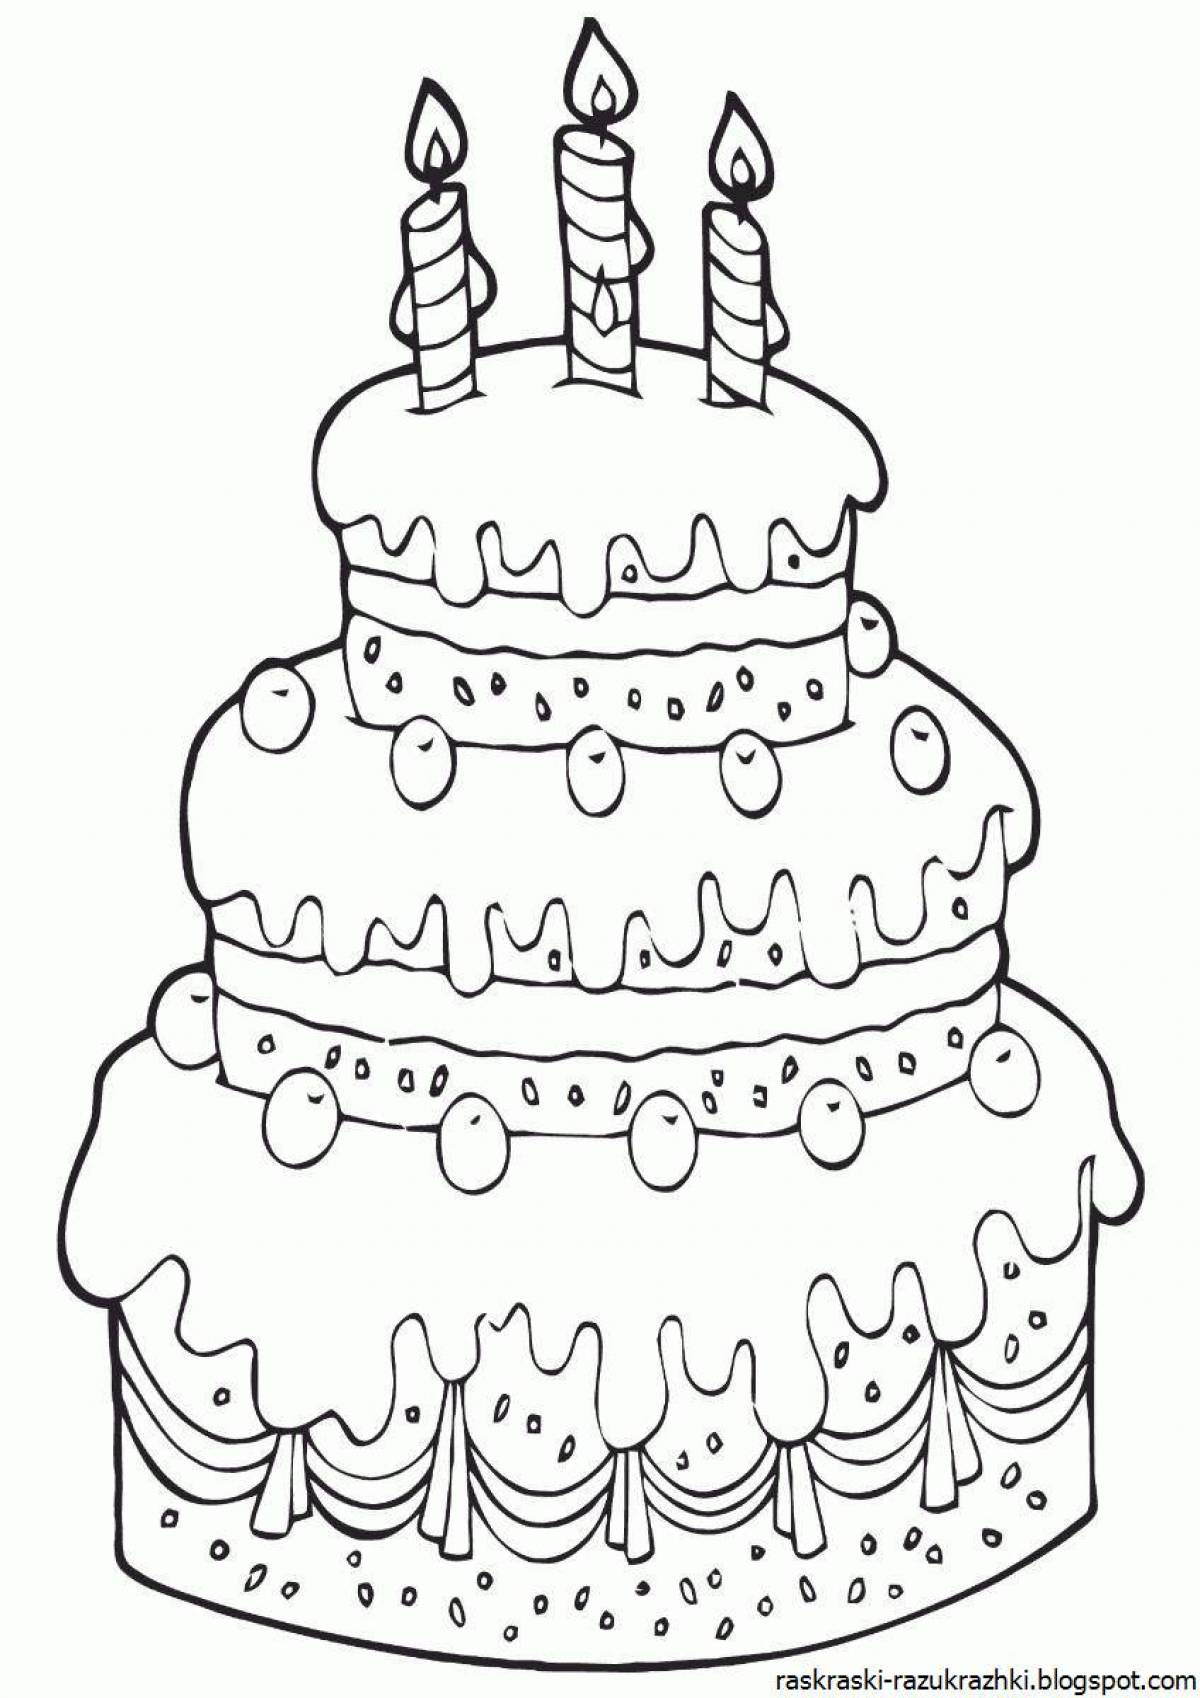 Amazing cakes coloring book for kids